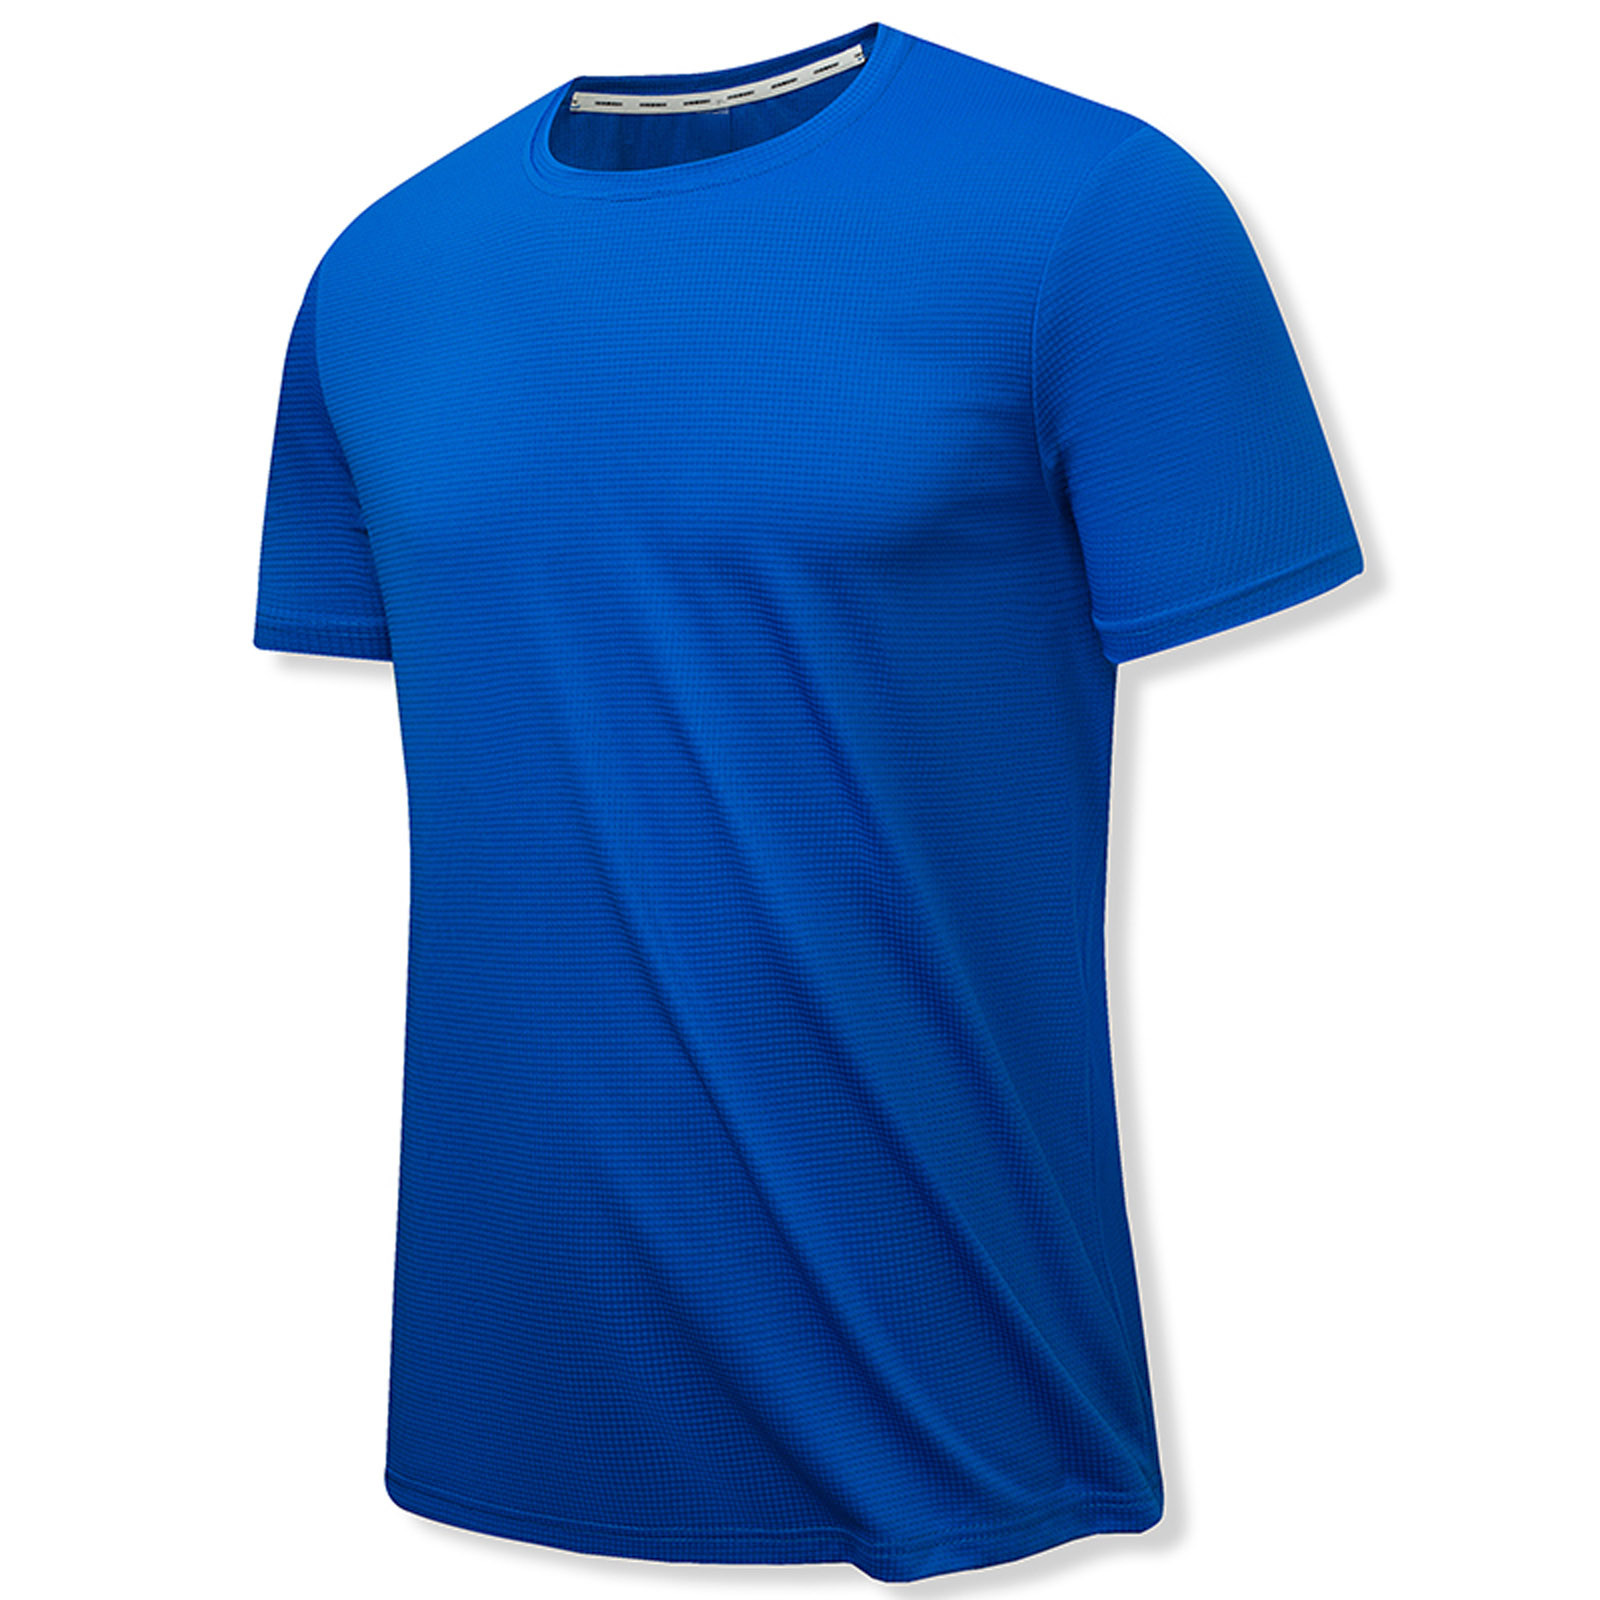 HangTaiLei Mens Quick Dry Workout Shirts Big and Tall Moisture-Wicking ...